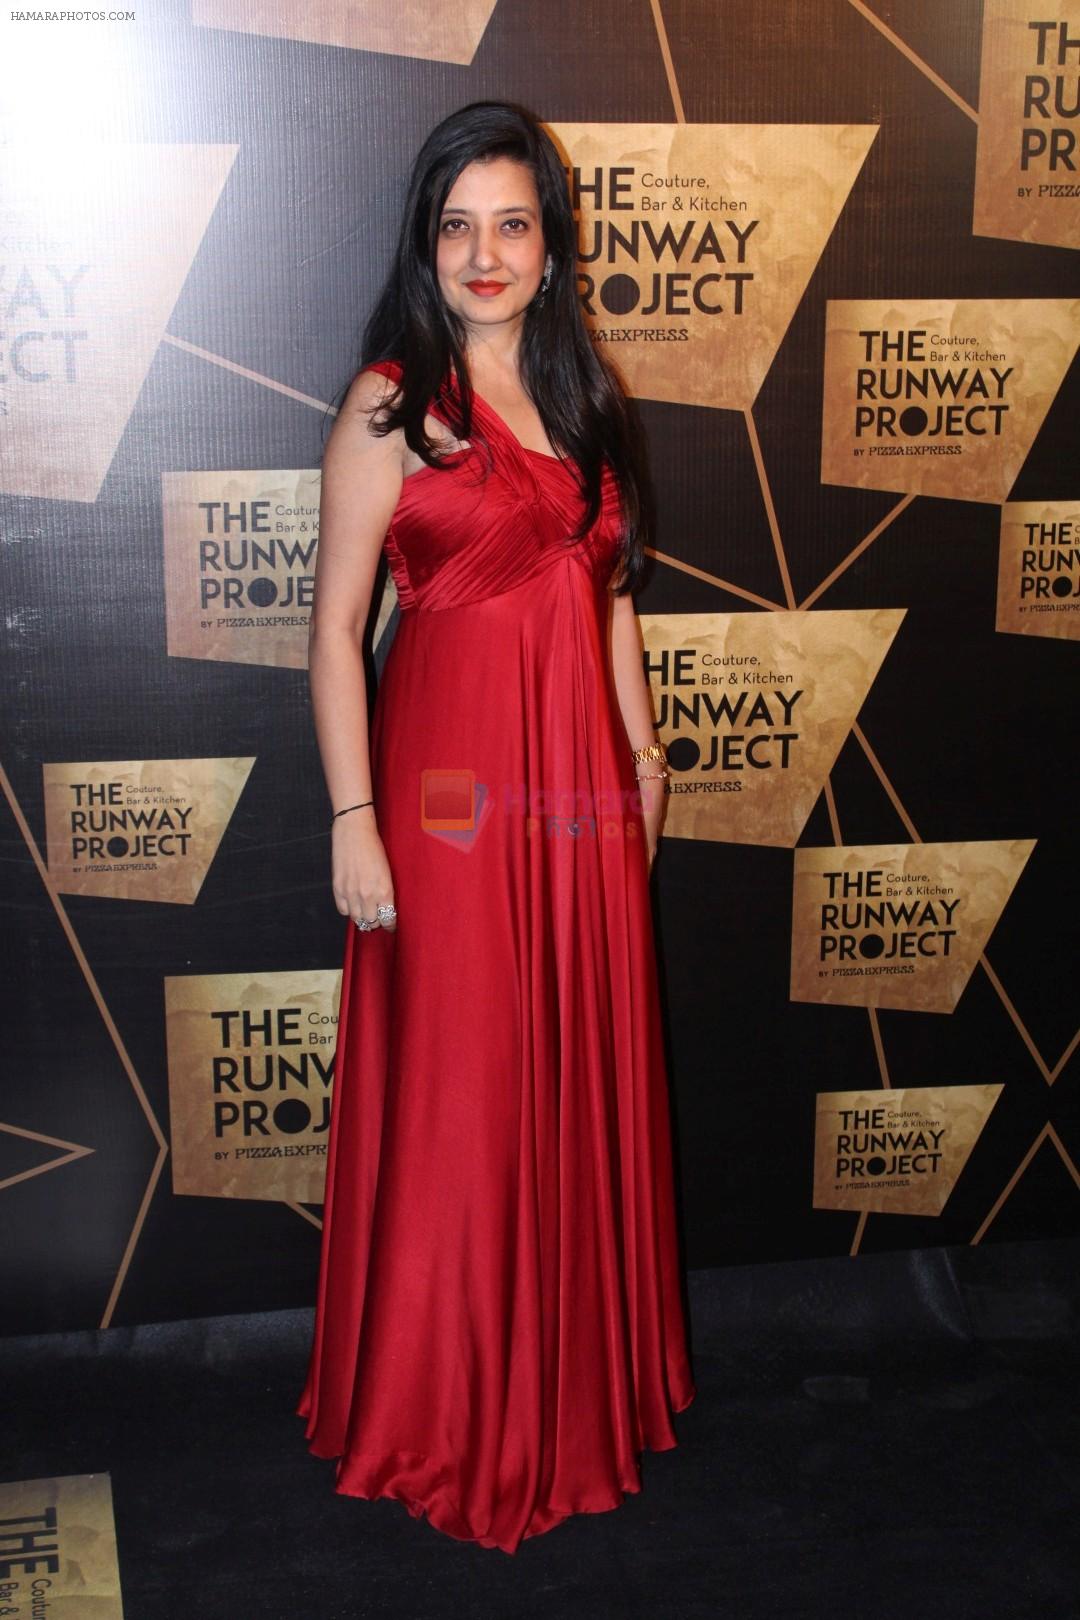 Amy Billimoria at the Red Carpet Of The Runway Project on 20th Nov 2017